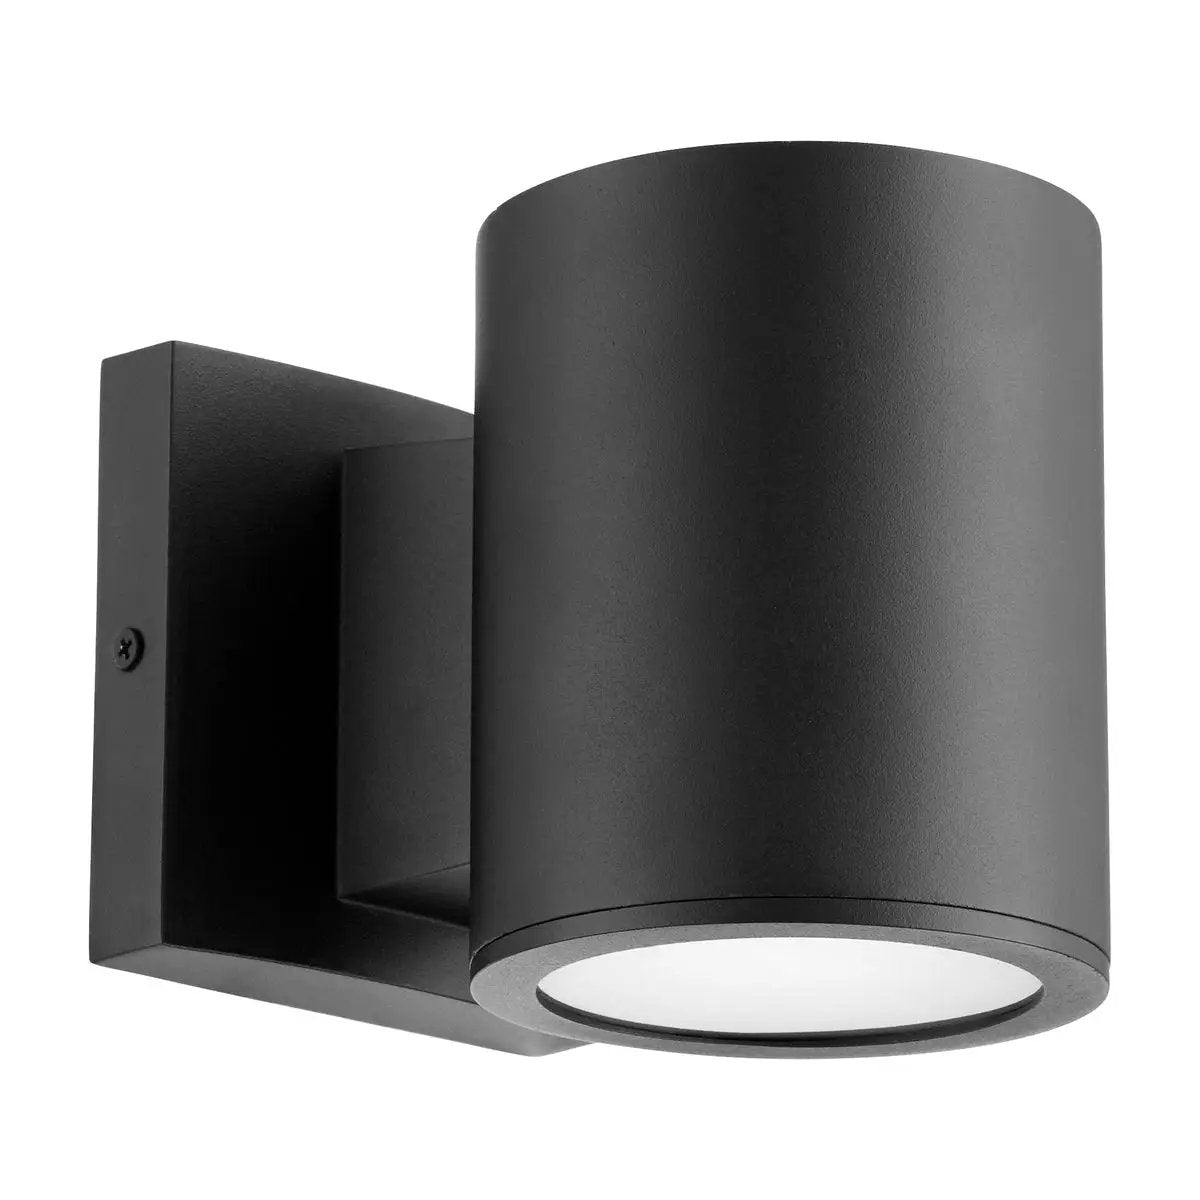 Cylinder Outdoor Wall Light with sleek design and LED light source. Contemporary appeal with beautiful finish and frosted glass shade. Perfect for updating your covered patio or home's exterior.